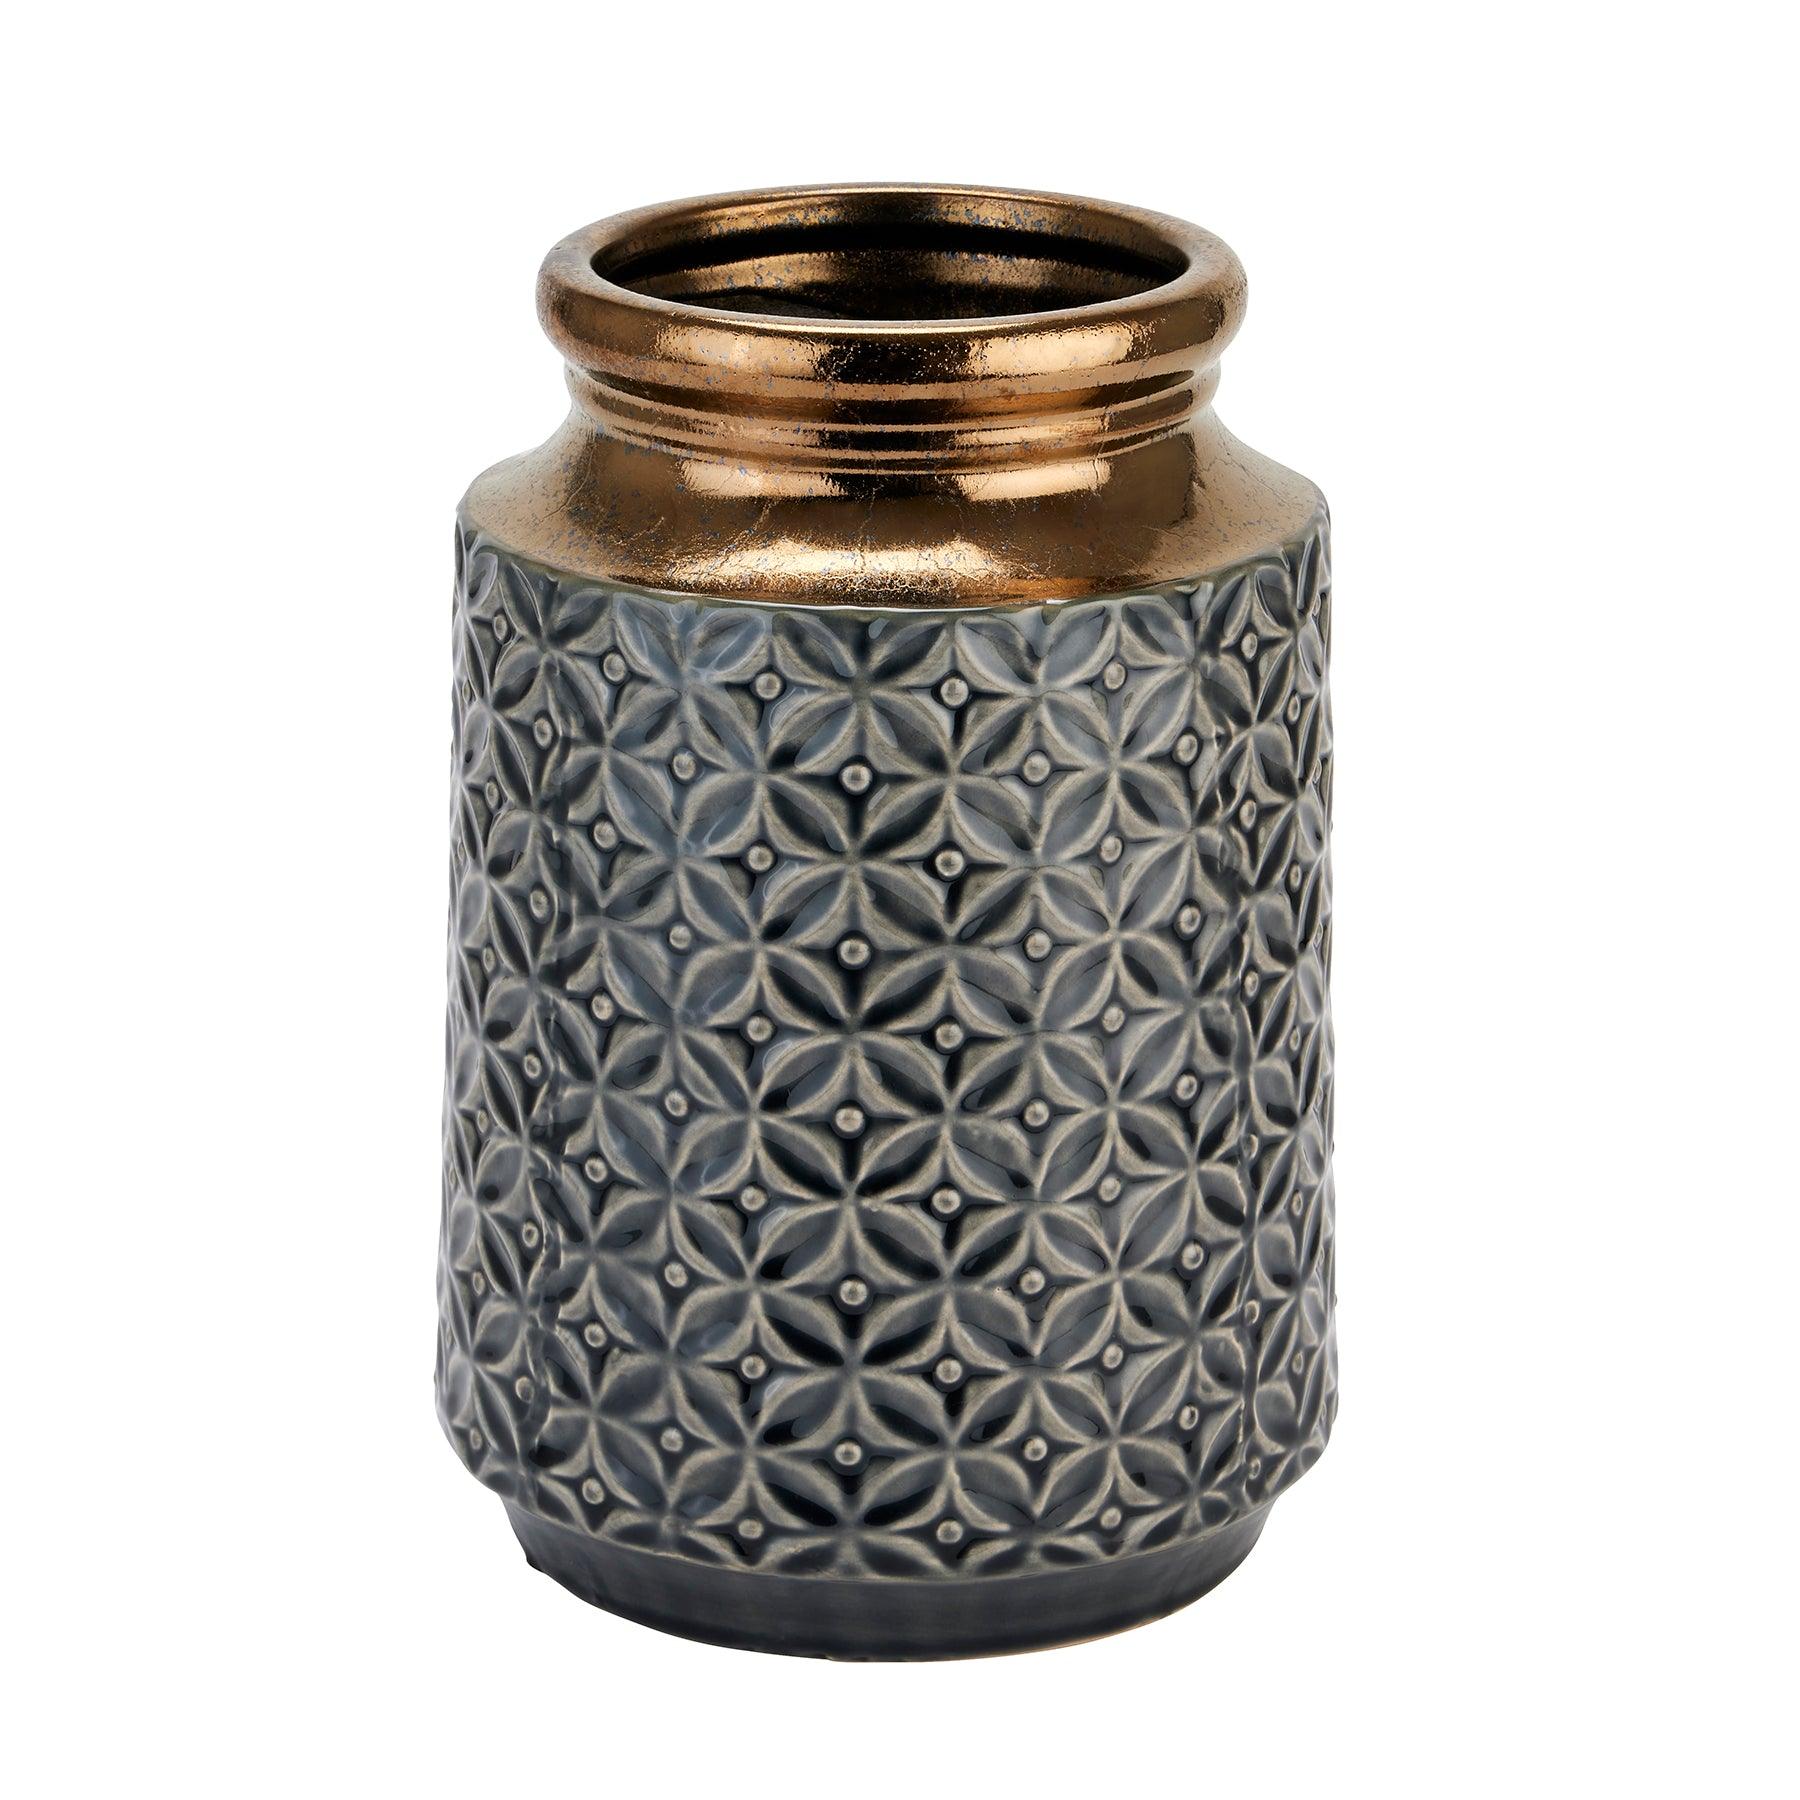 Seville Collection Lebes Squat Vase - £49.95 - Gifts & Accessories > Vases 